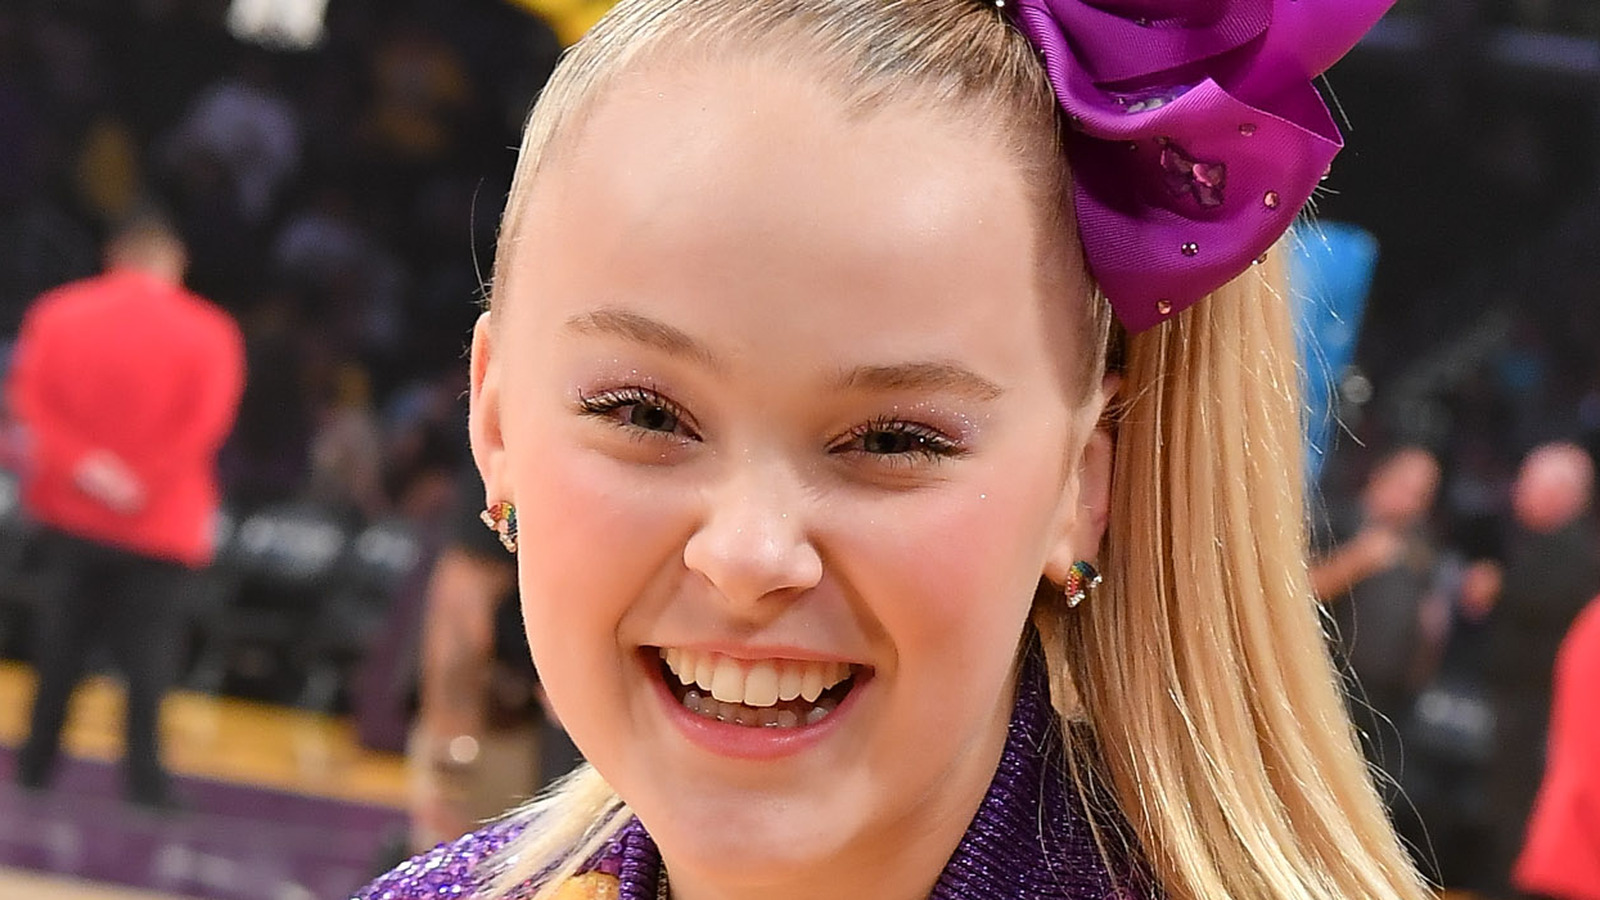 JoJo Siwa's Net Worth The YouTuber Is Worth More Than You Think